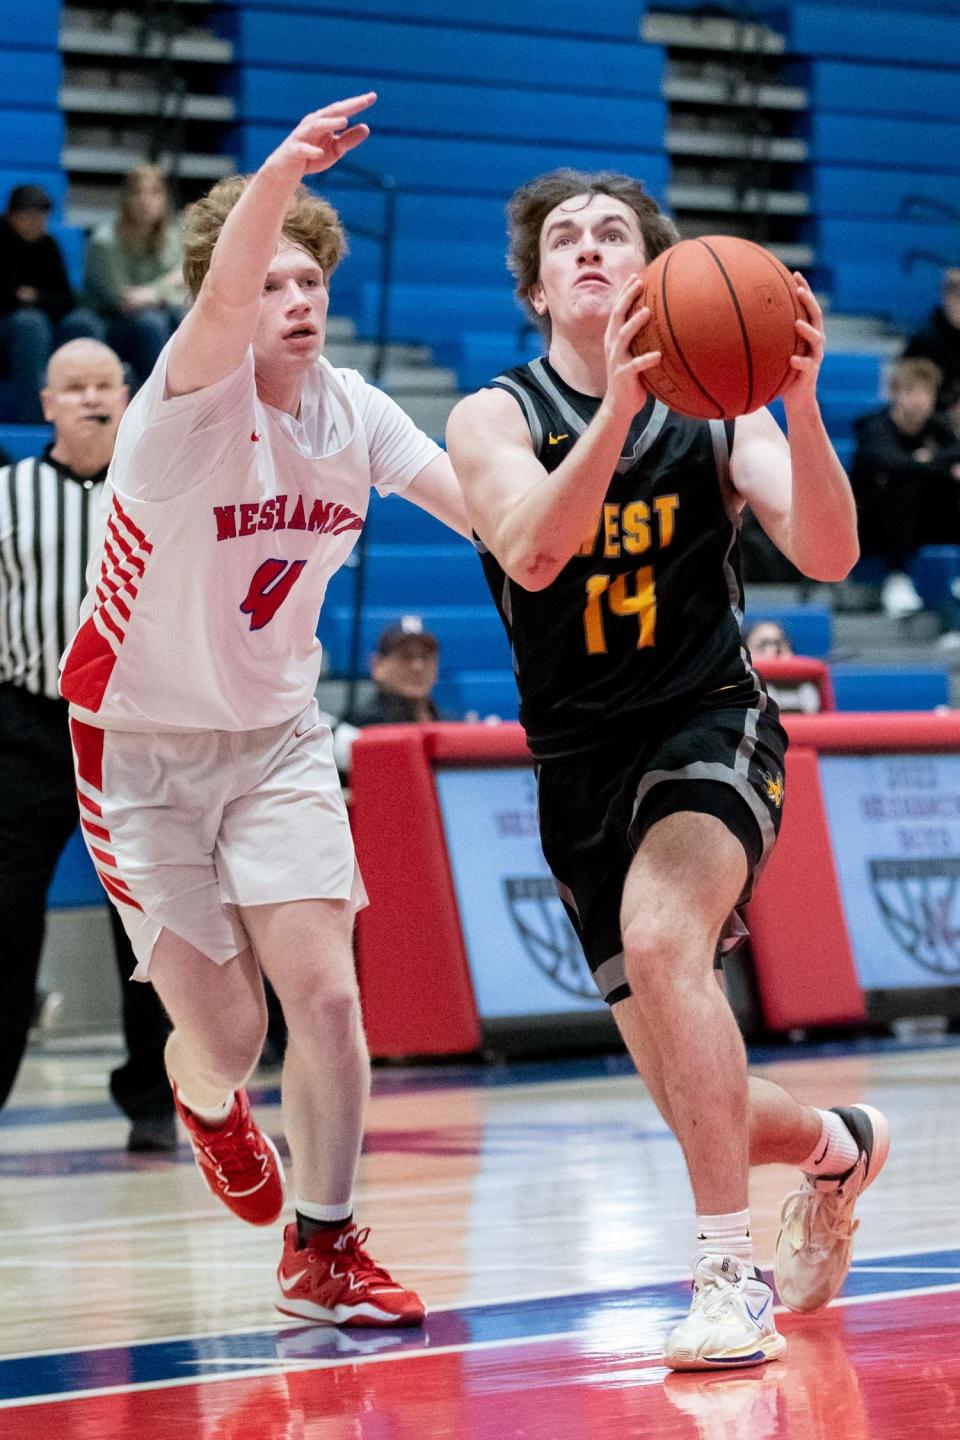 Central Bucks West's Charlie Cashman drives to the basket as Neshaminy's Ryan Meehan defends during a January 20 game.